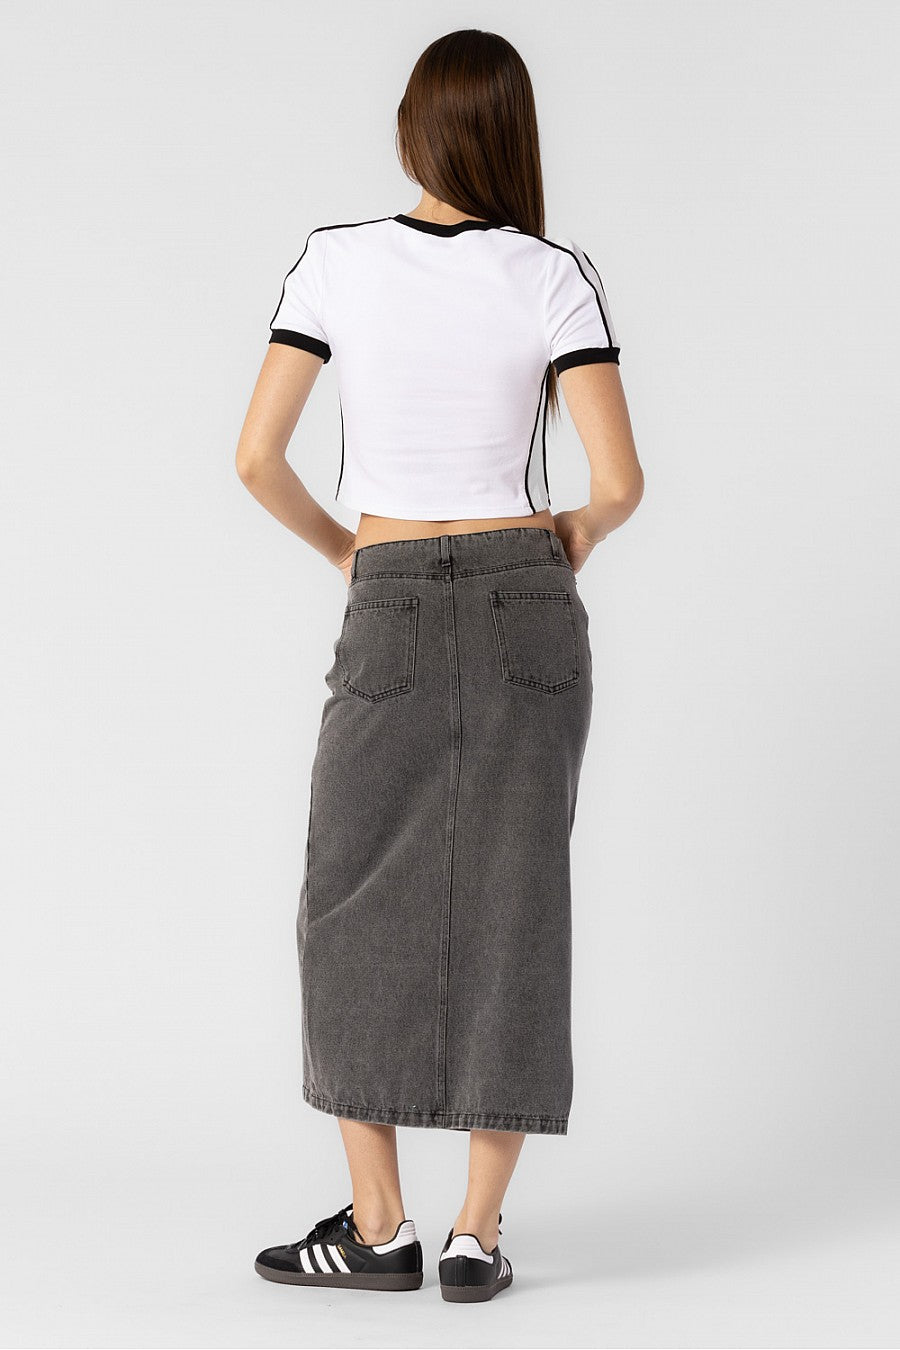 Model is wearing a grey denim midi skirt with front slit.